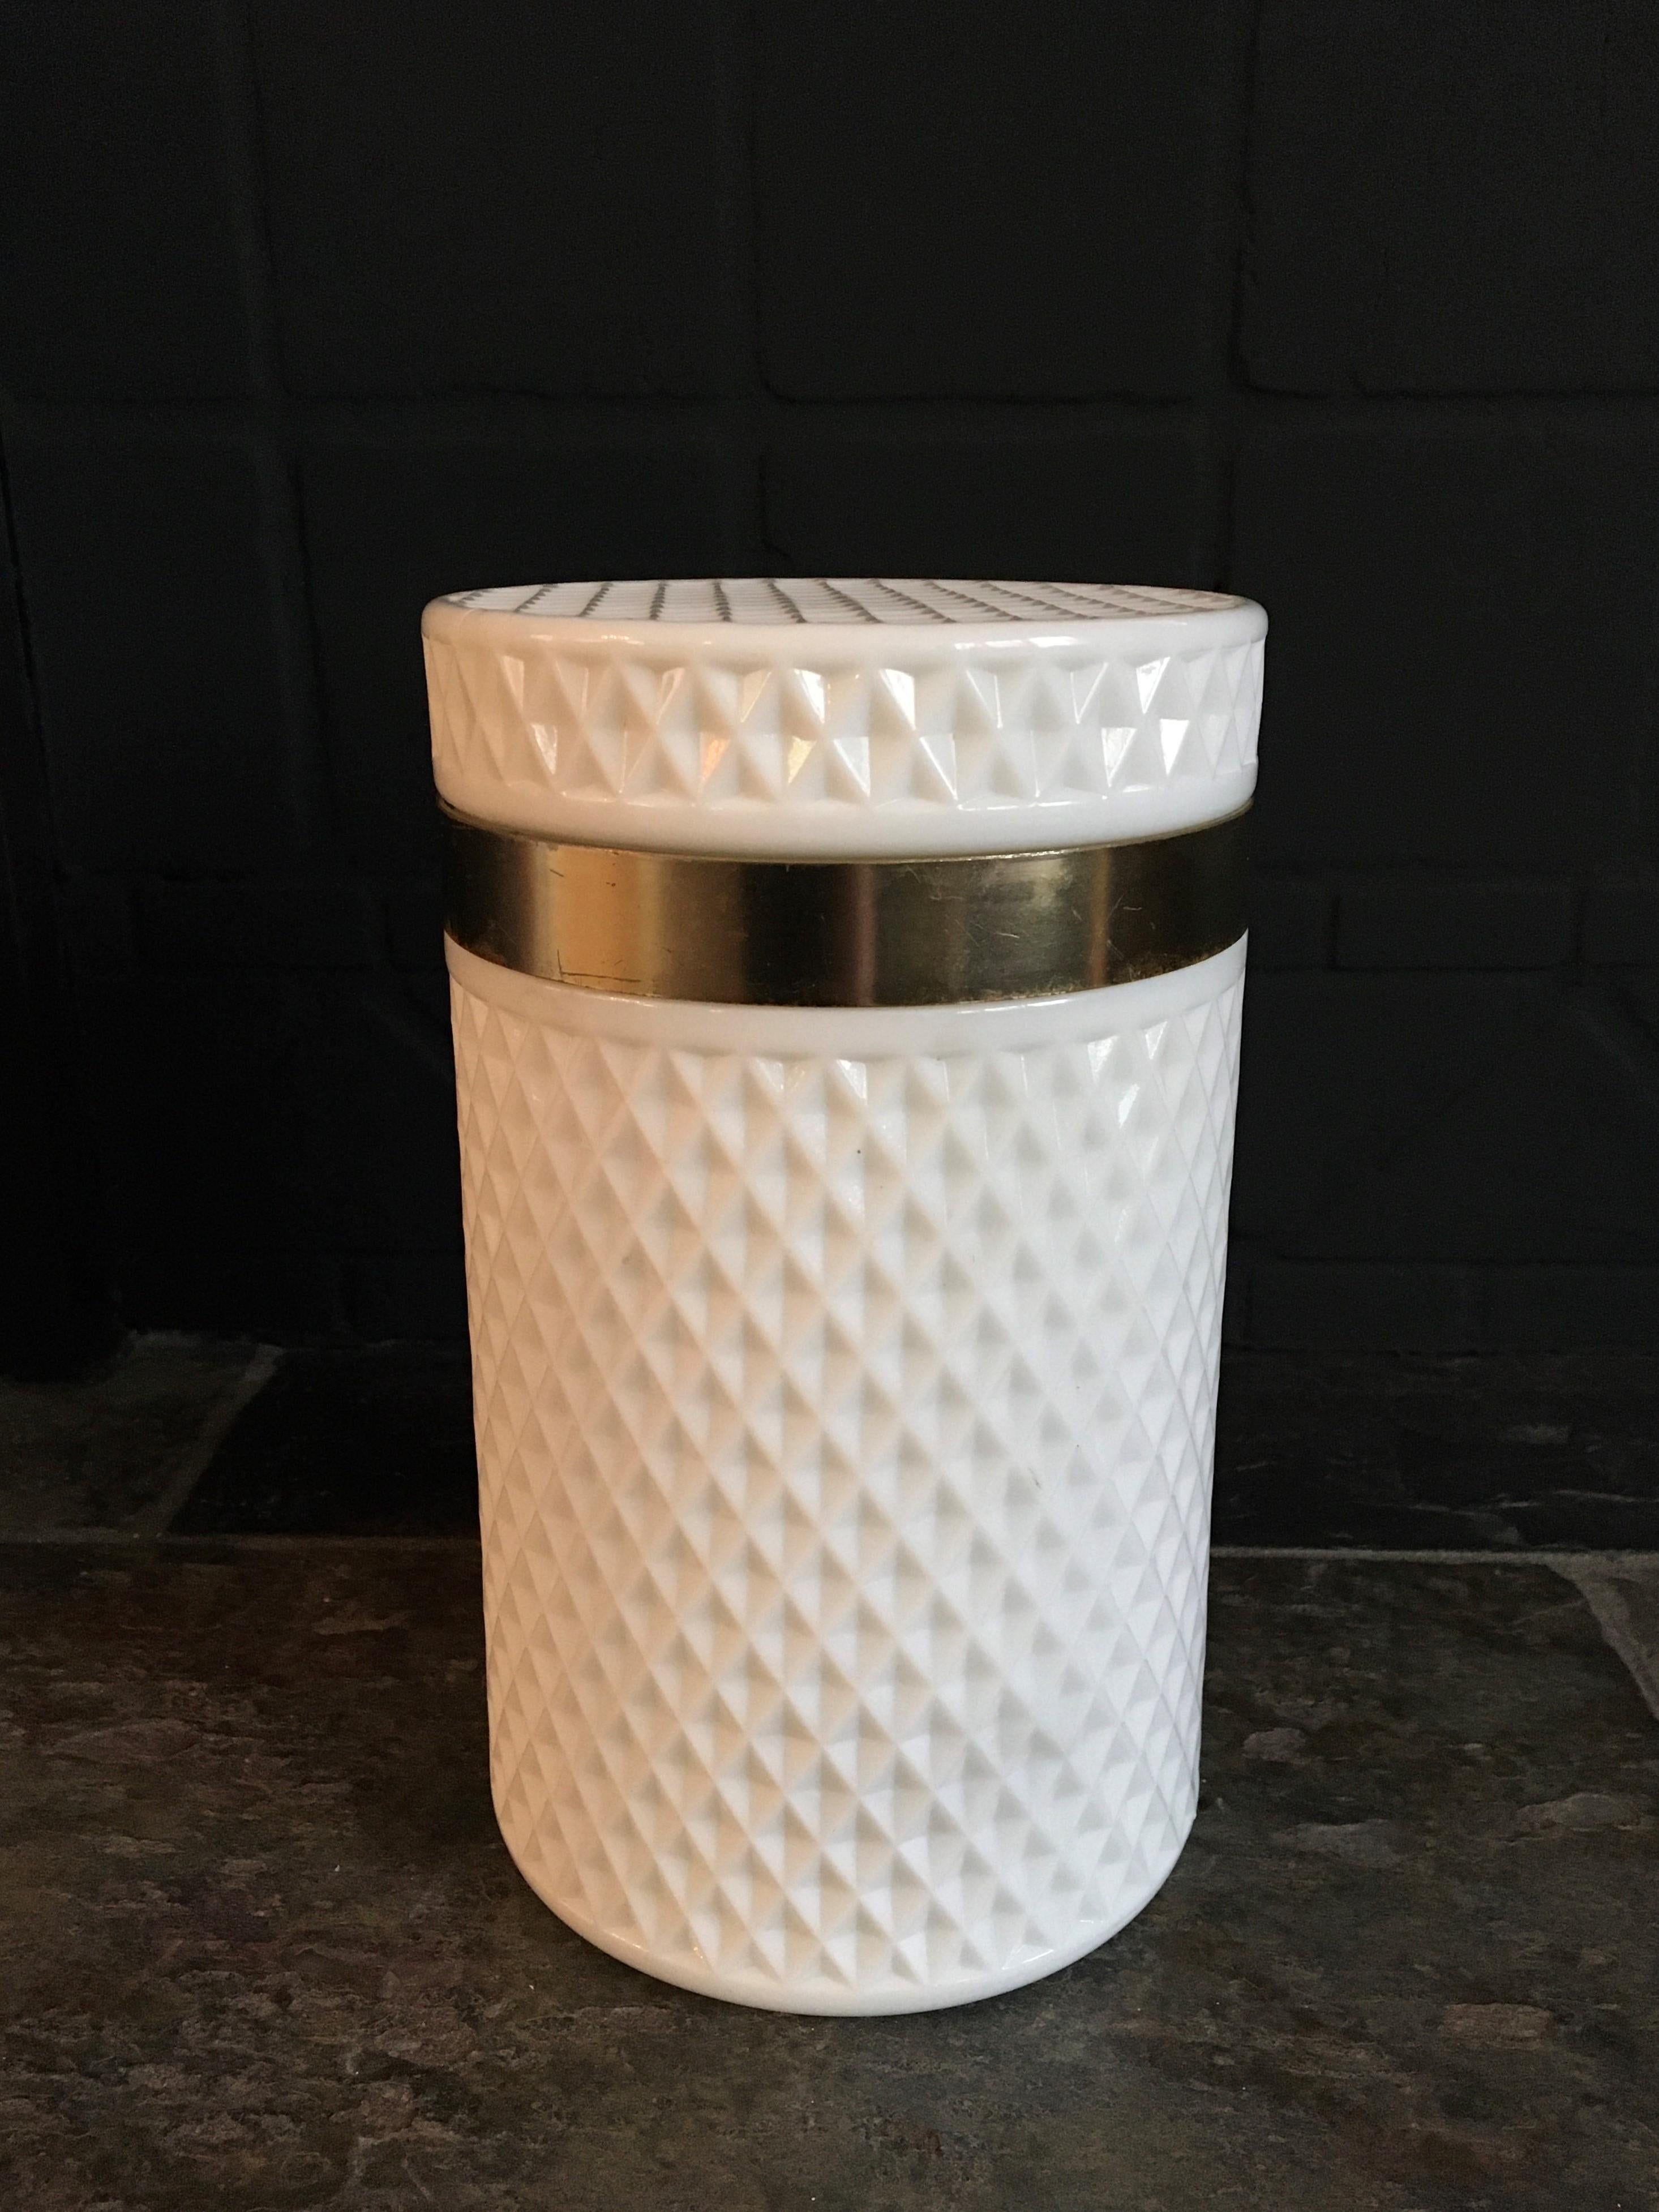 Stylish white opaline glass box. 
This white opaline pot has a diamond cut pattern all around and on the lid. 
It it round shaped - tube shaped - cilinder shaped with a gold metal ring around. 
The white glass is still very beautiful without any